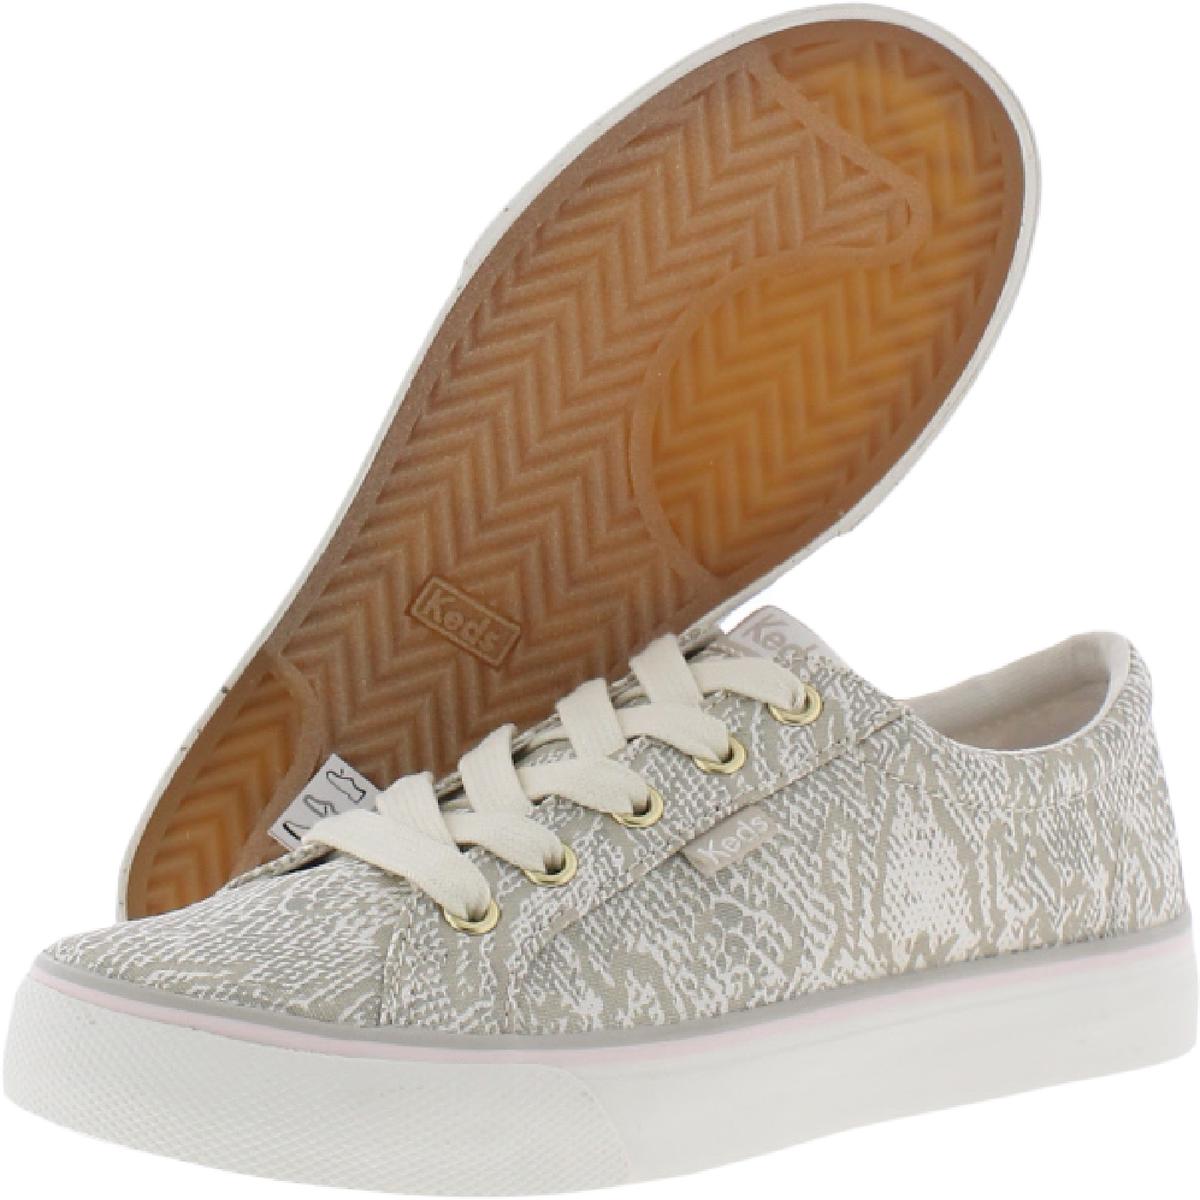 Keds Womens Canvas Lace Up Casual and Fashion Sneakers